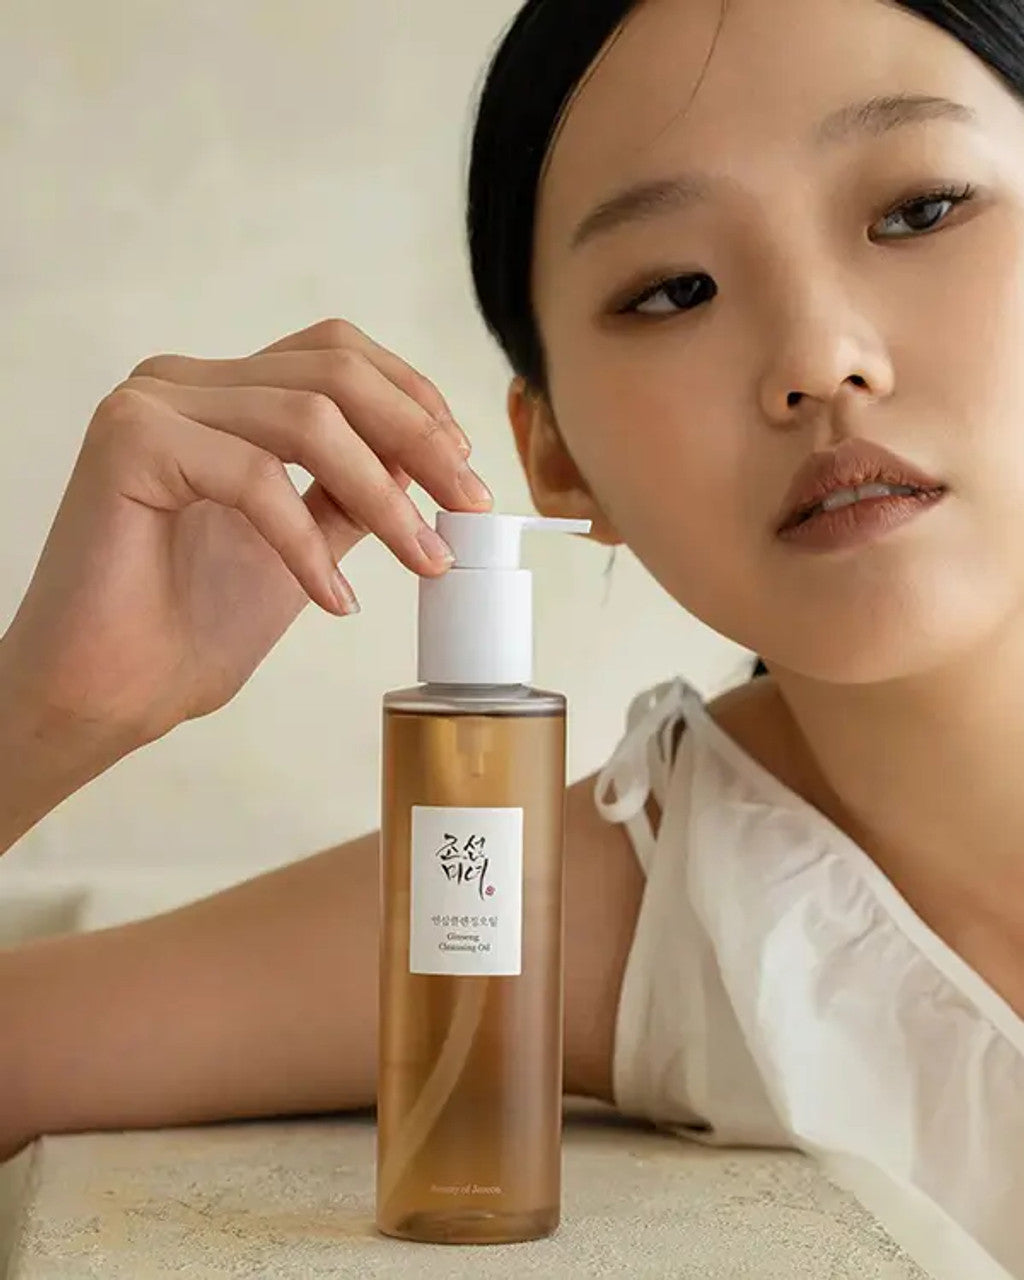 Beauty of Joseon Ginseng Cleansing Oil, 210ml